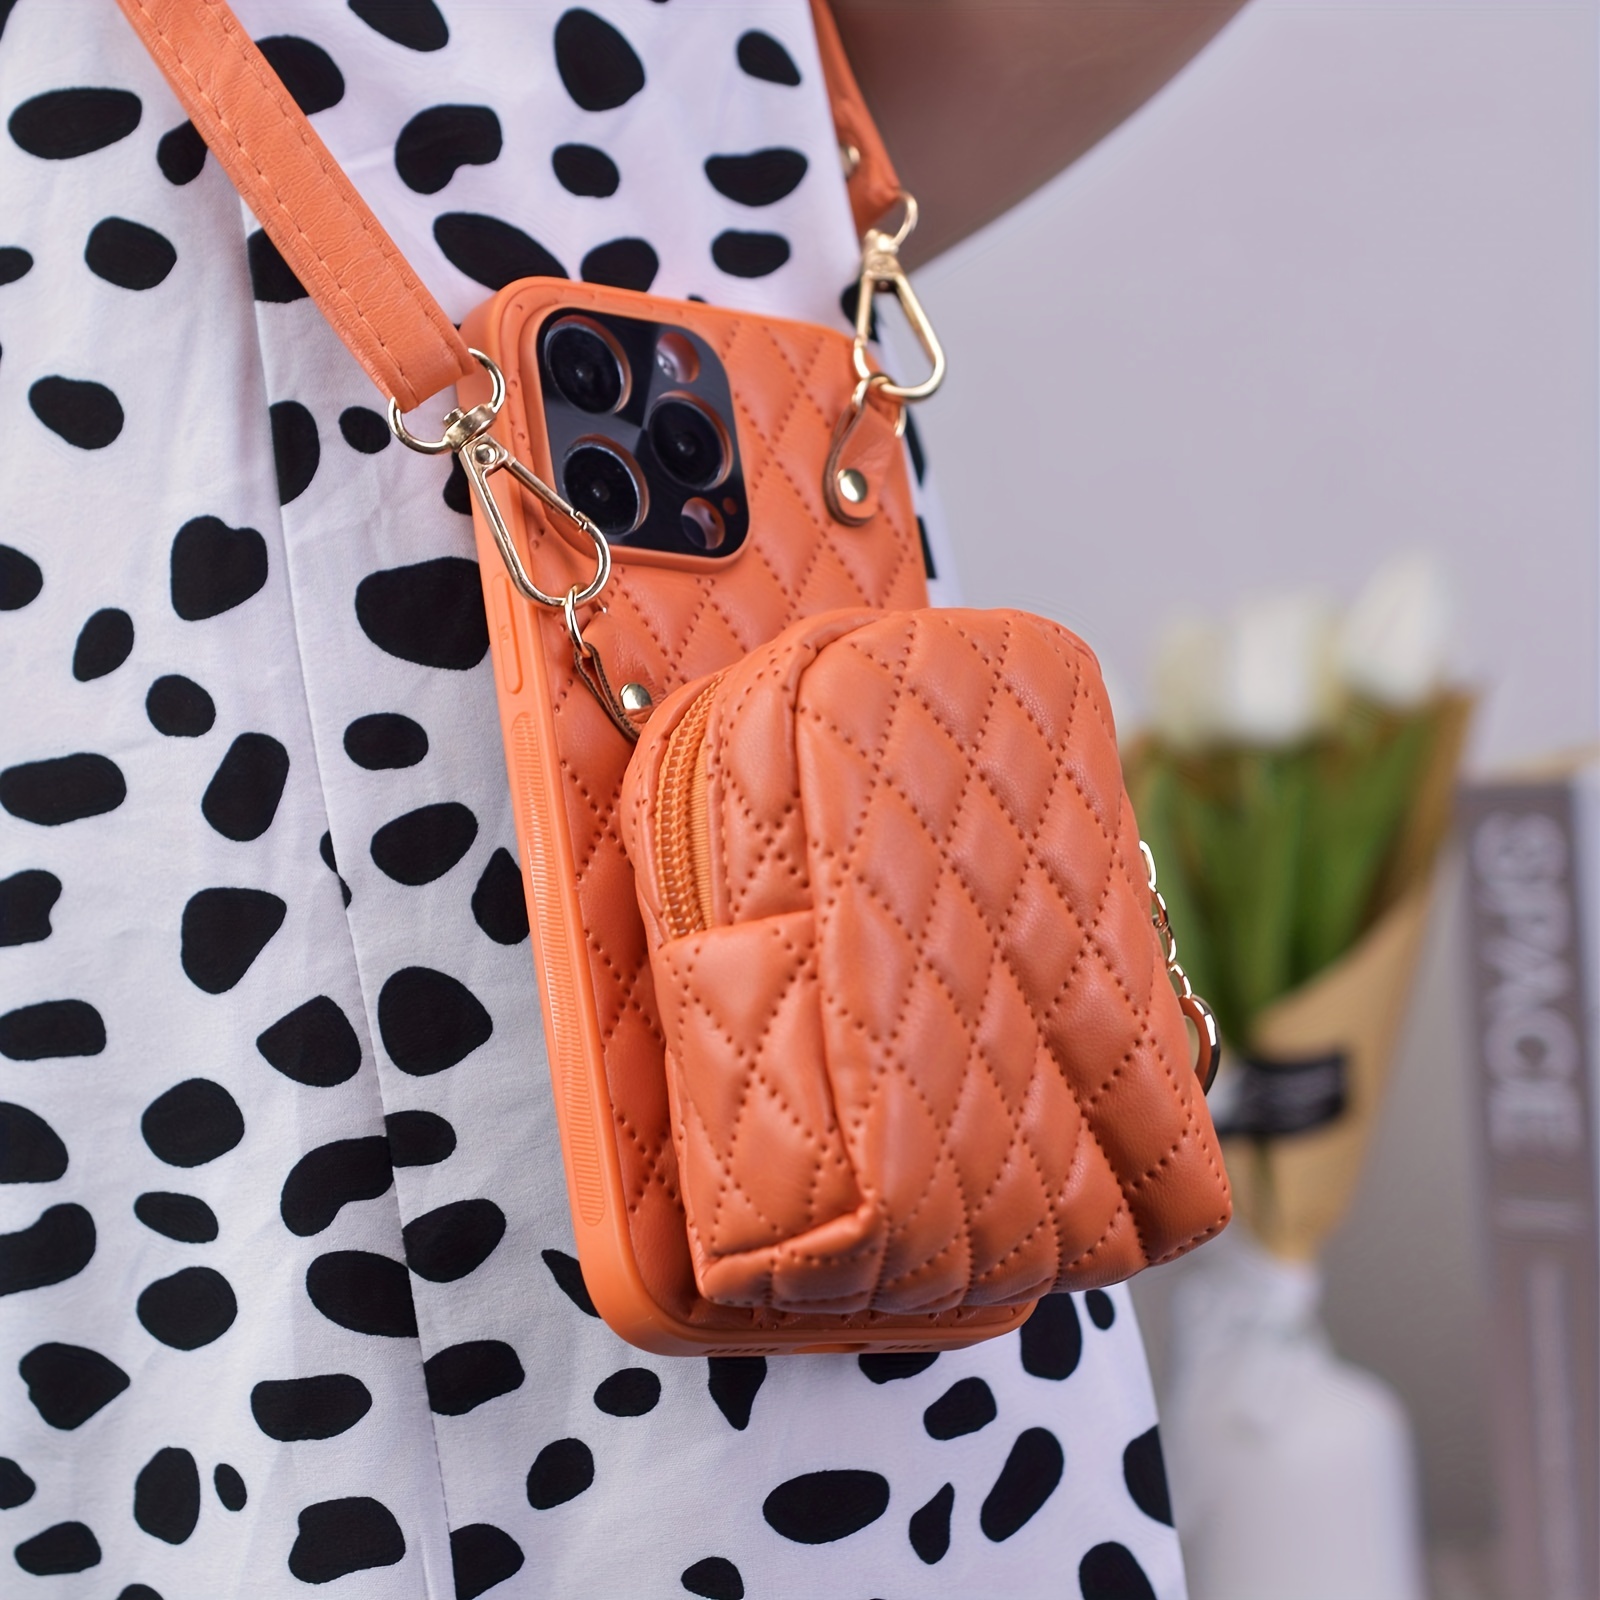 

Chic Orange Diamond Grid Pattern Phone Case With Strap, Faux Leather, Hardware Zipper Card Holder Wallet, Precise Camera Frame Fit For 14/13/12/11 Plus Pro Max - 4.7x3.82x1.85 Inches